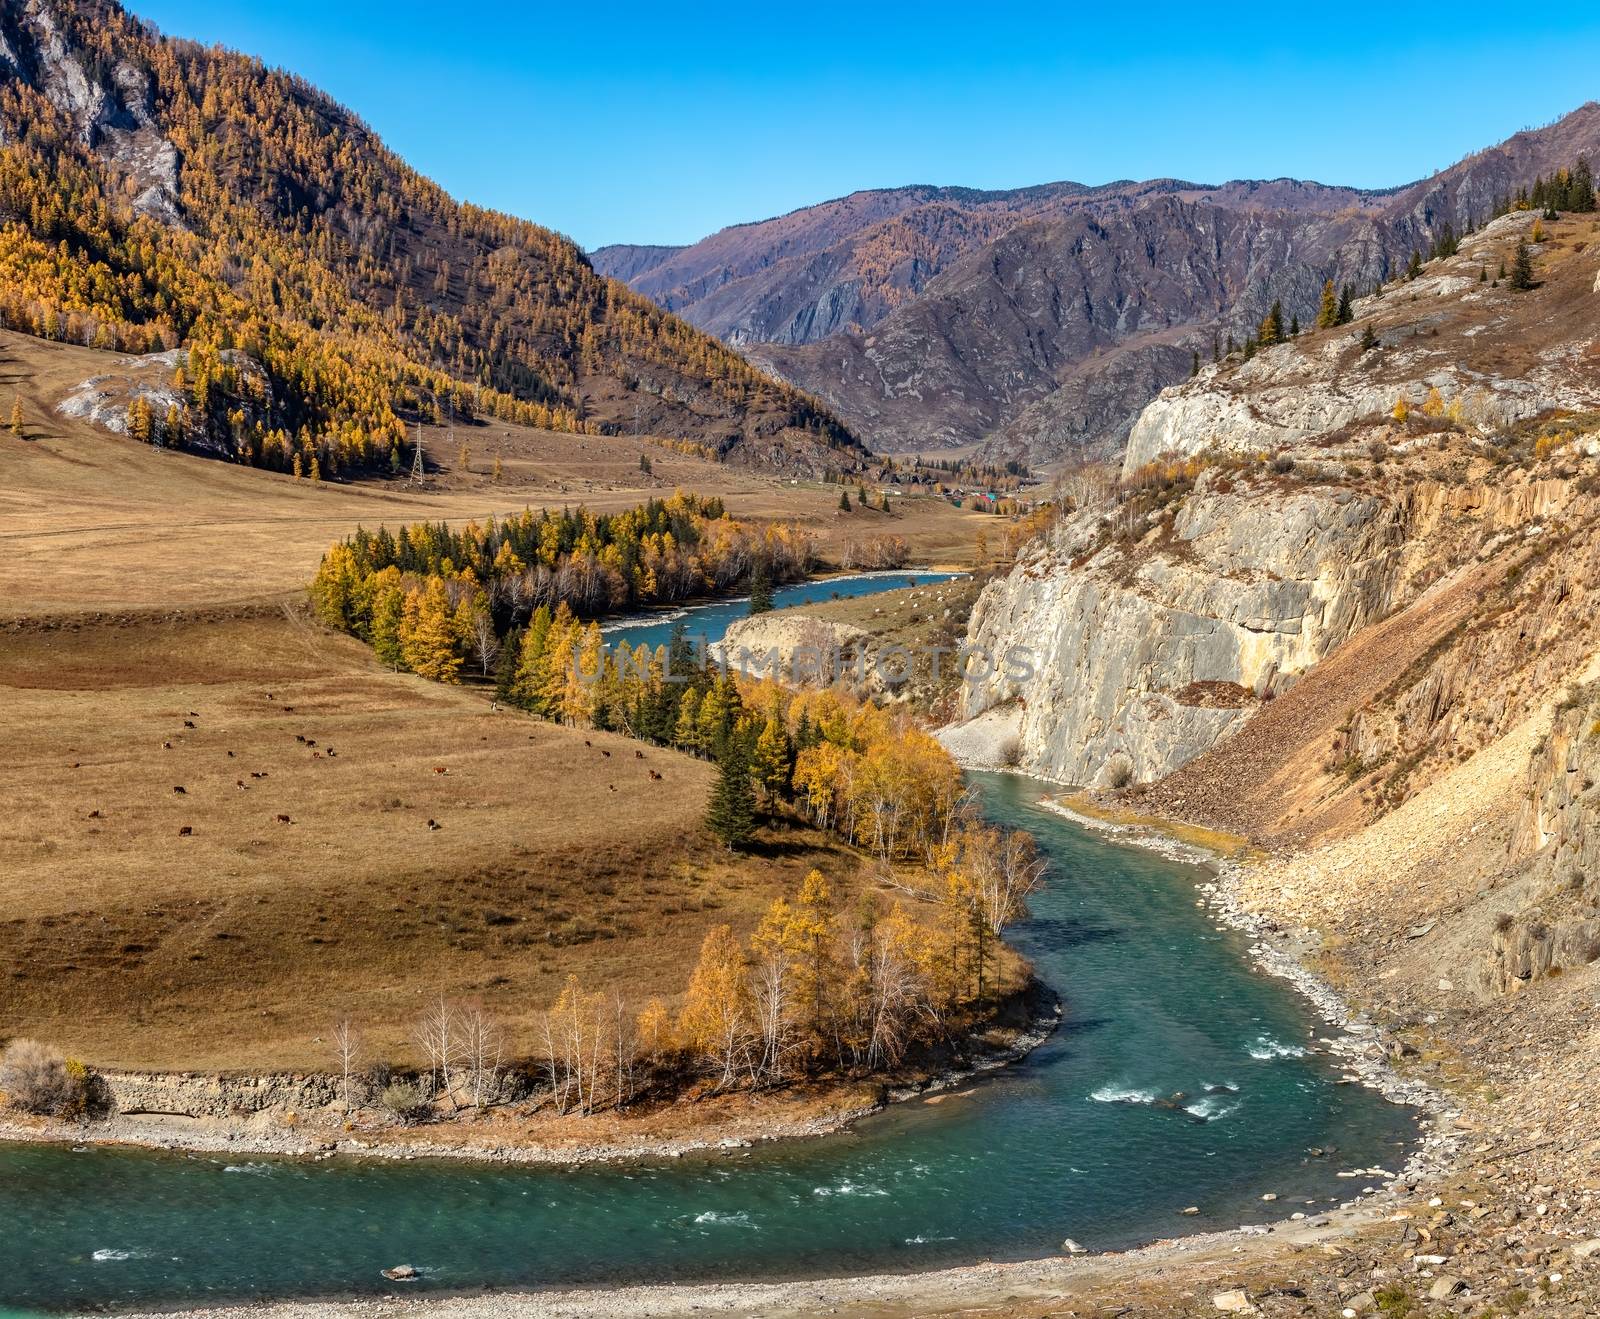 S-shaped Katun river with yellow and green trees by DamantisZ